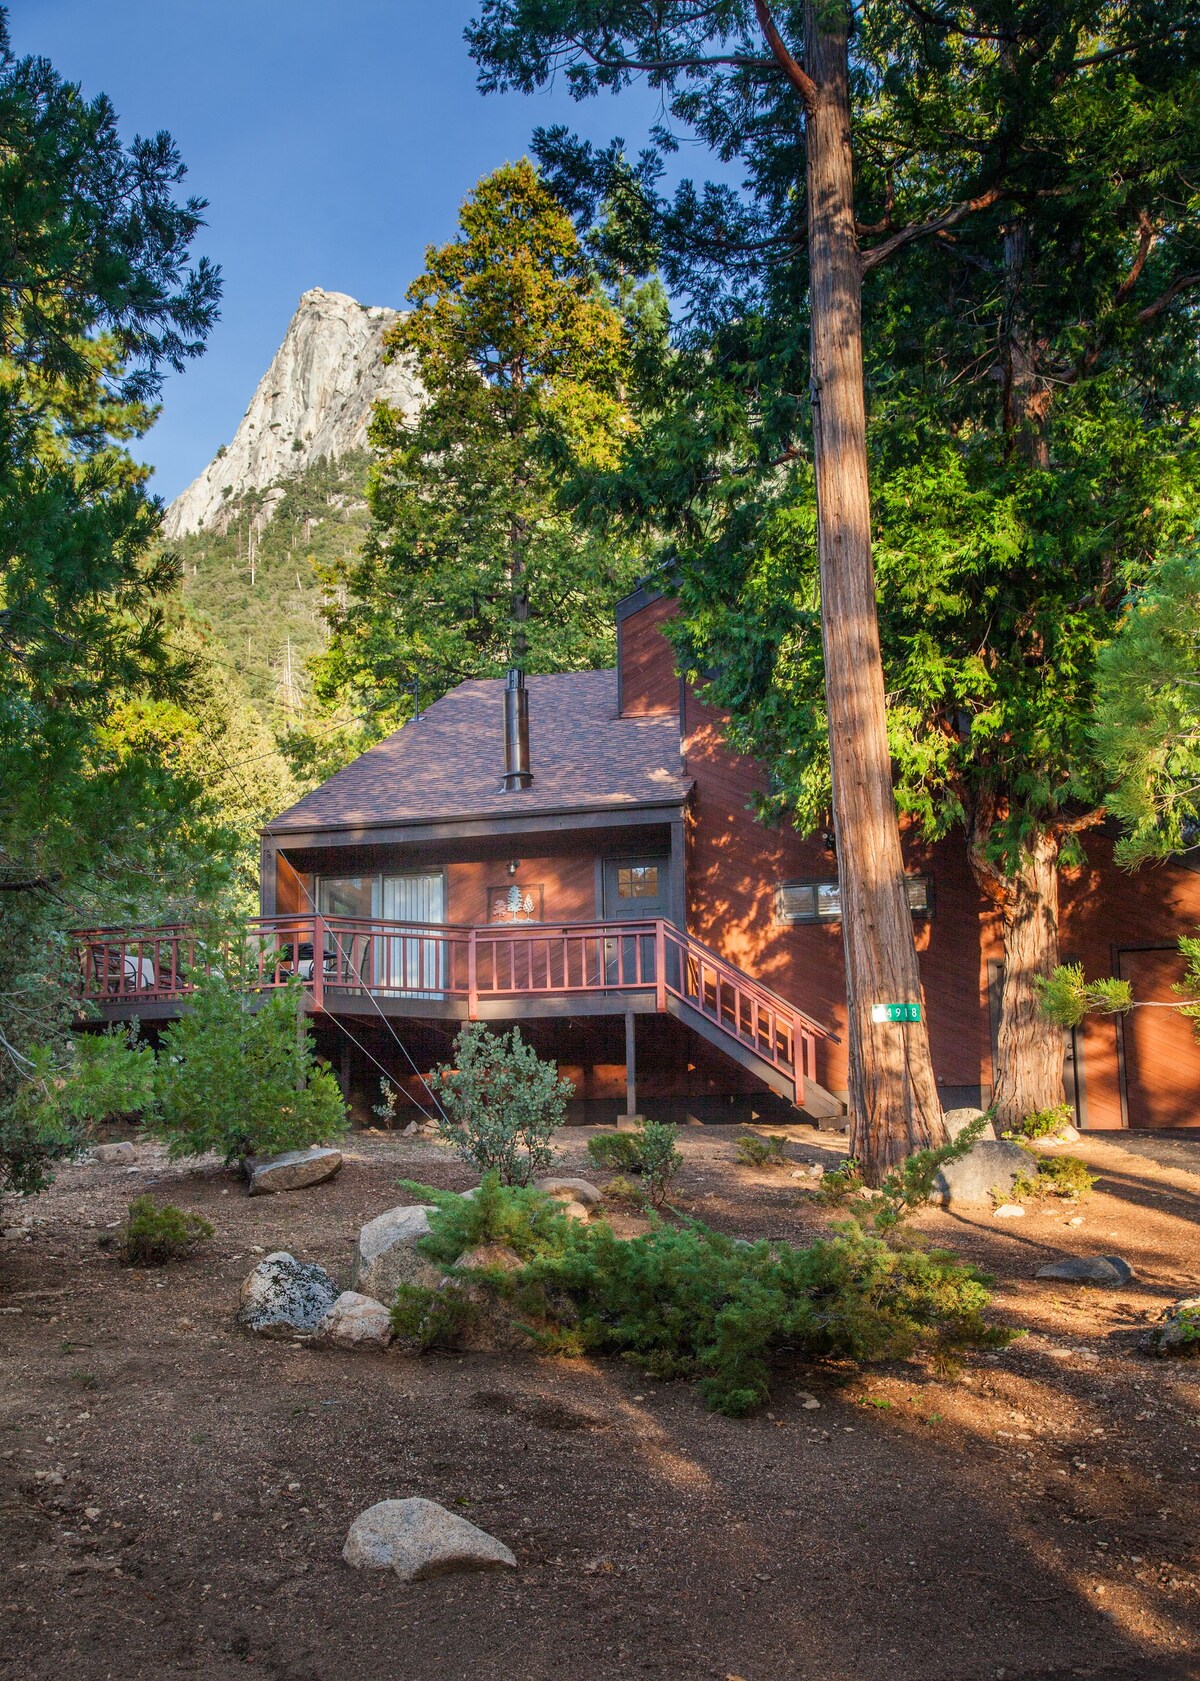 Be Pine - Pet-friendly cabin close to trails